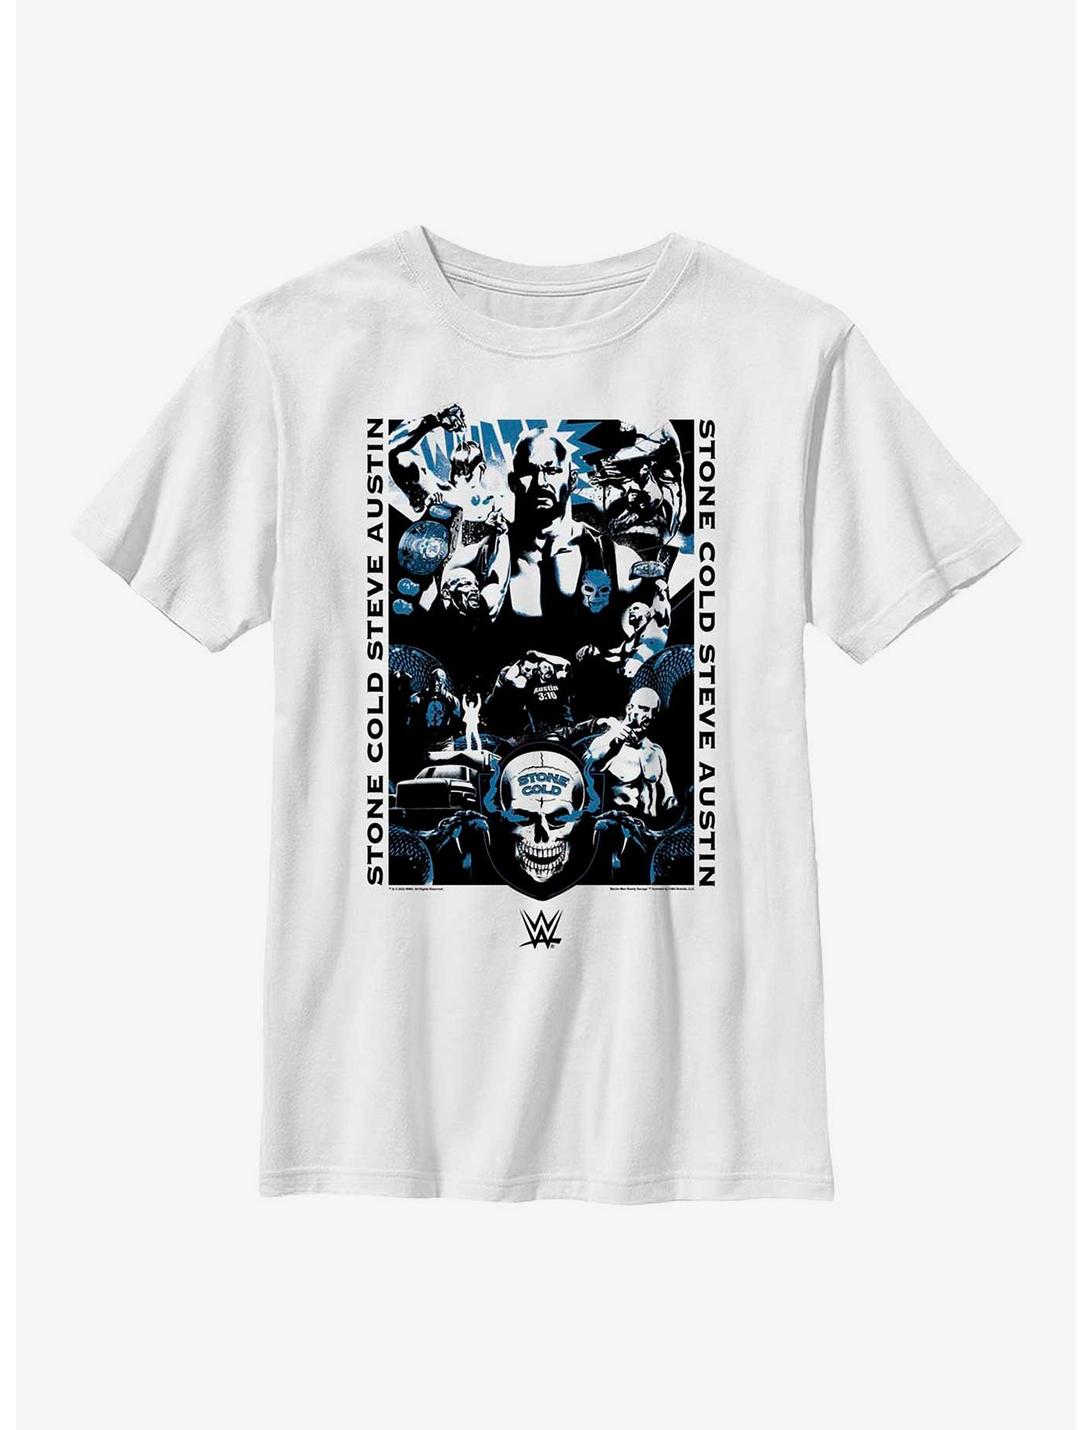 WWE Stone Cold Steve Austin Collage Youth T-Shirt, WHITE, hi-res